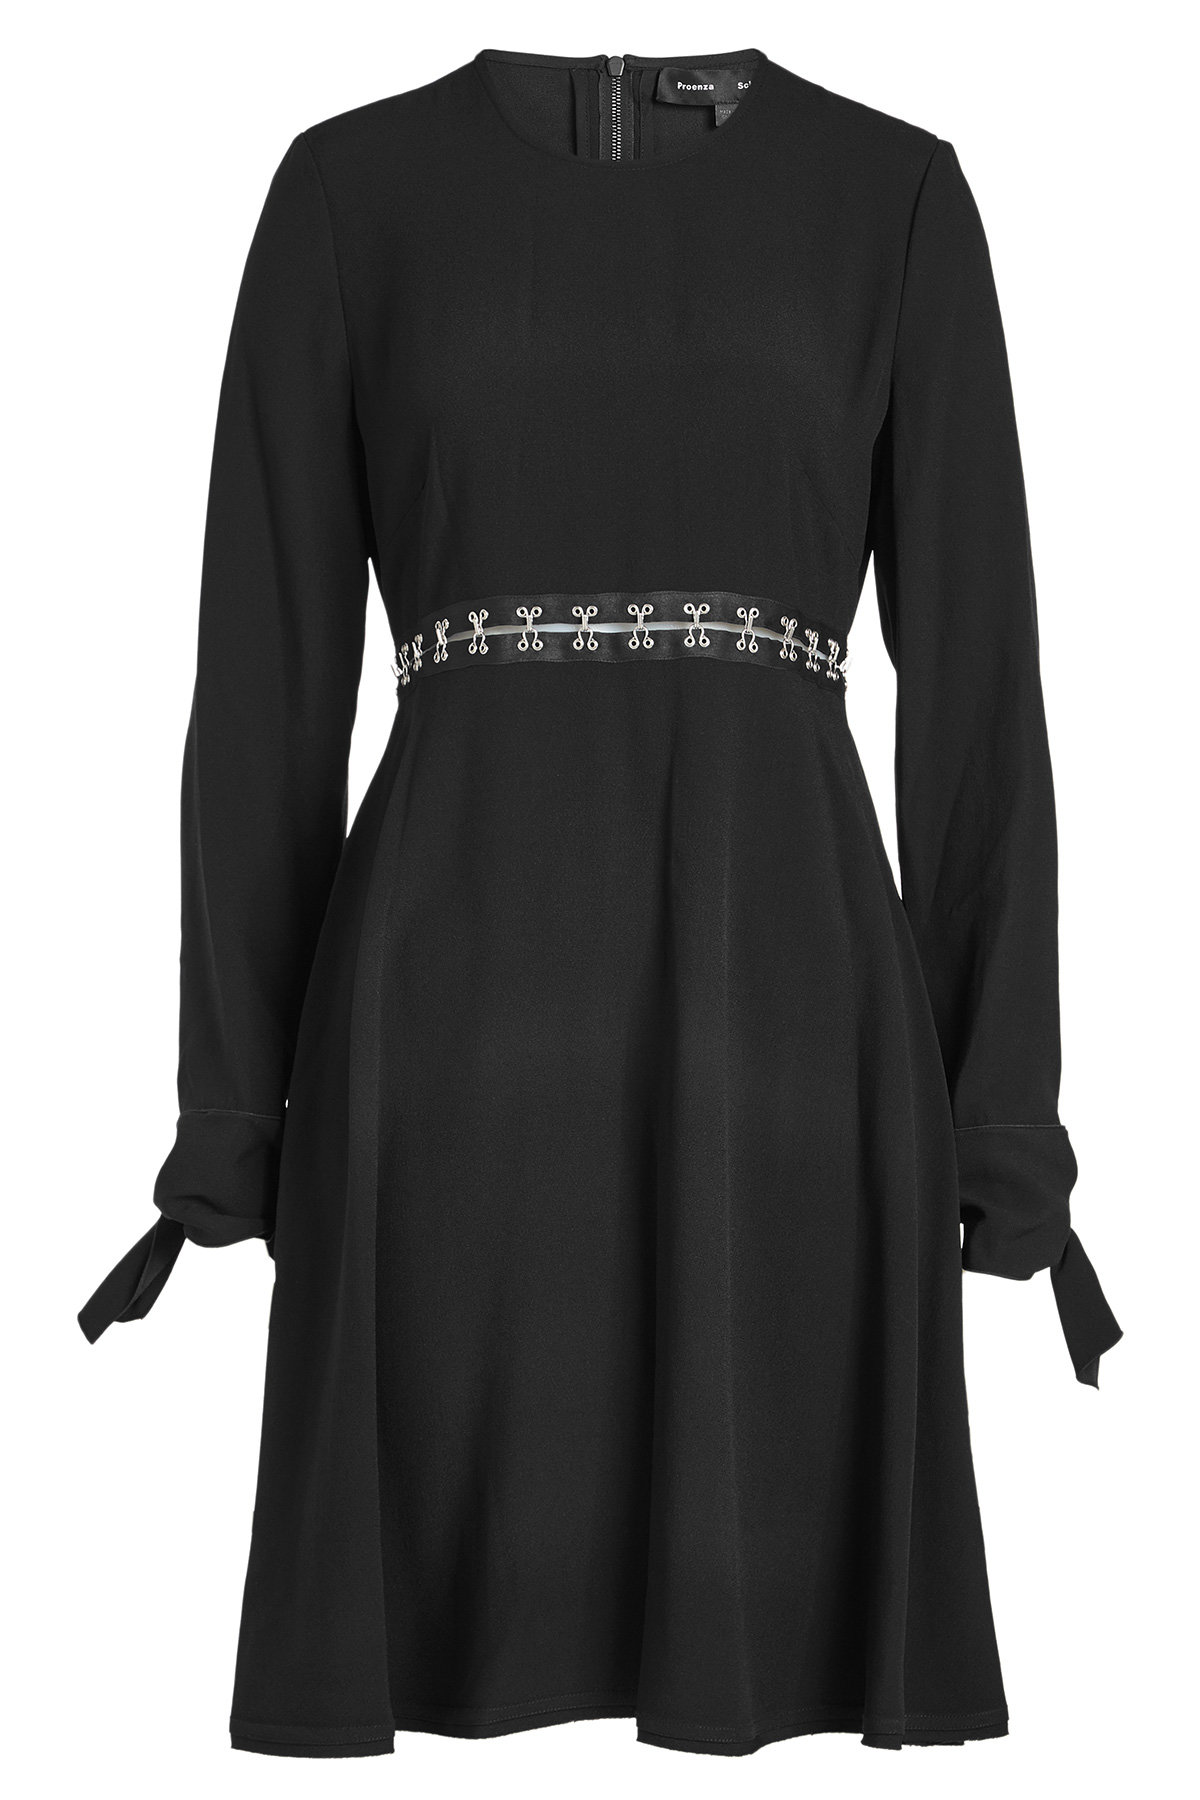 Crepe Dress with Embellished Waist by Proenza Schouler